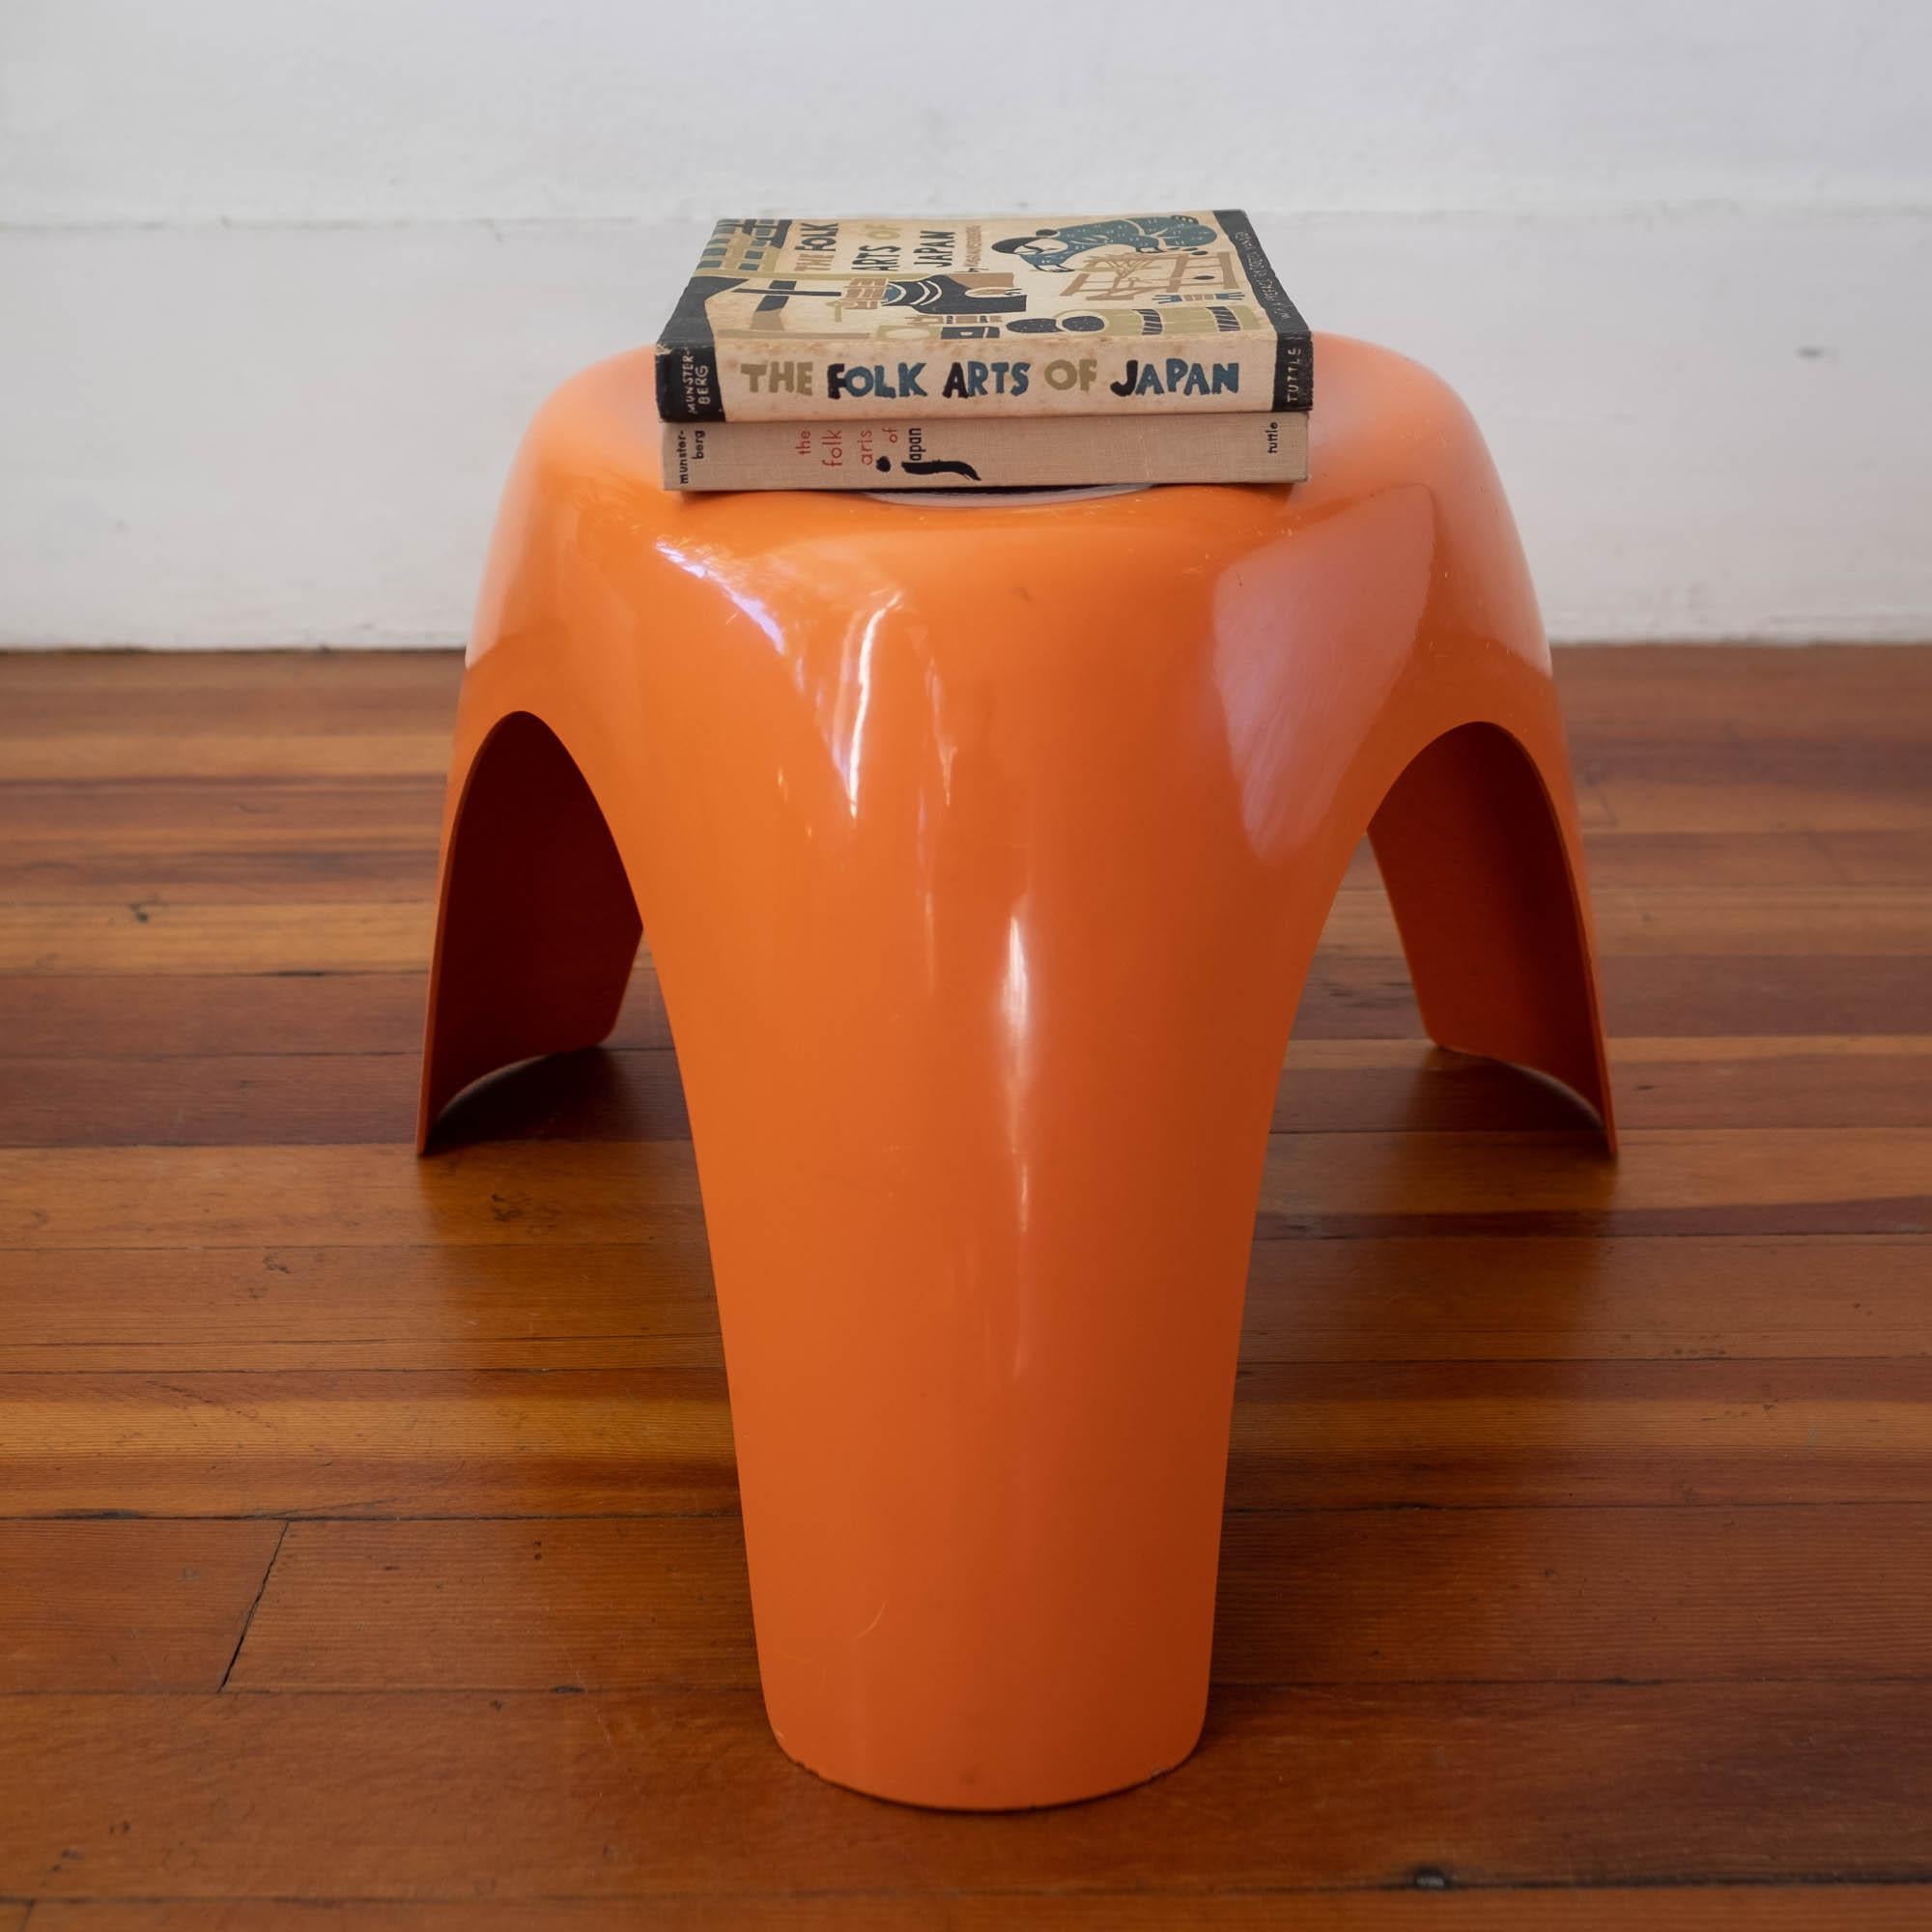 Orange fibreglass elephant stool by Sori Yanagi, which was designed in 1954. Sori was the son of the Japanese Folk Crafts Museum founder, Soetsu Yanagi. Having studied both art and architecture, he pioneered Japanese postwar Industrial Design. He